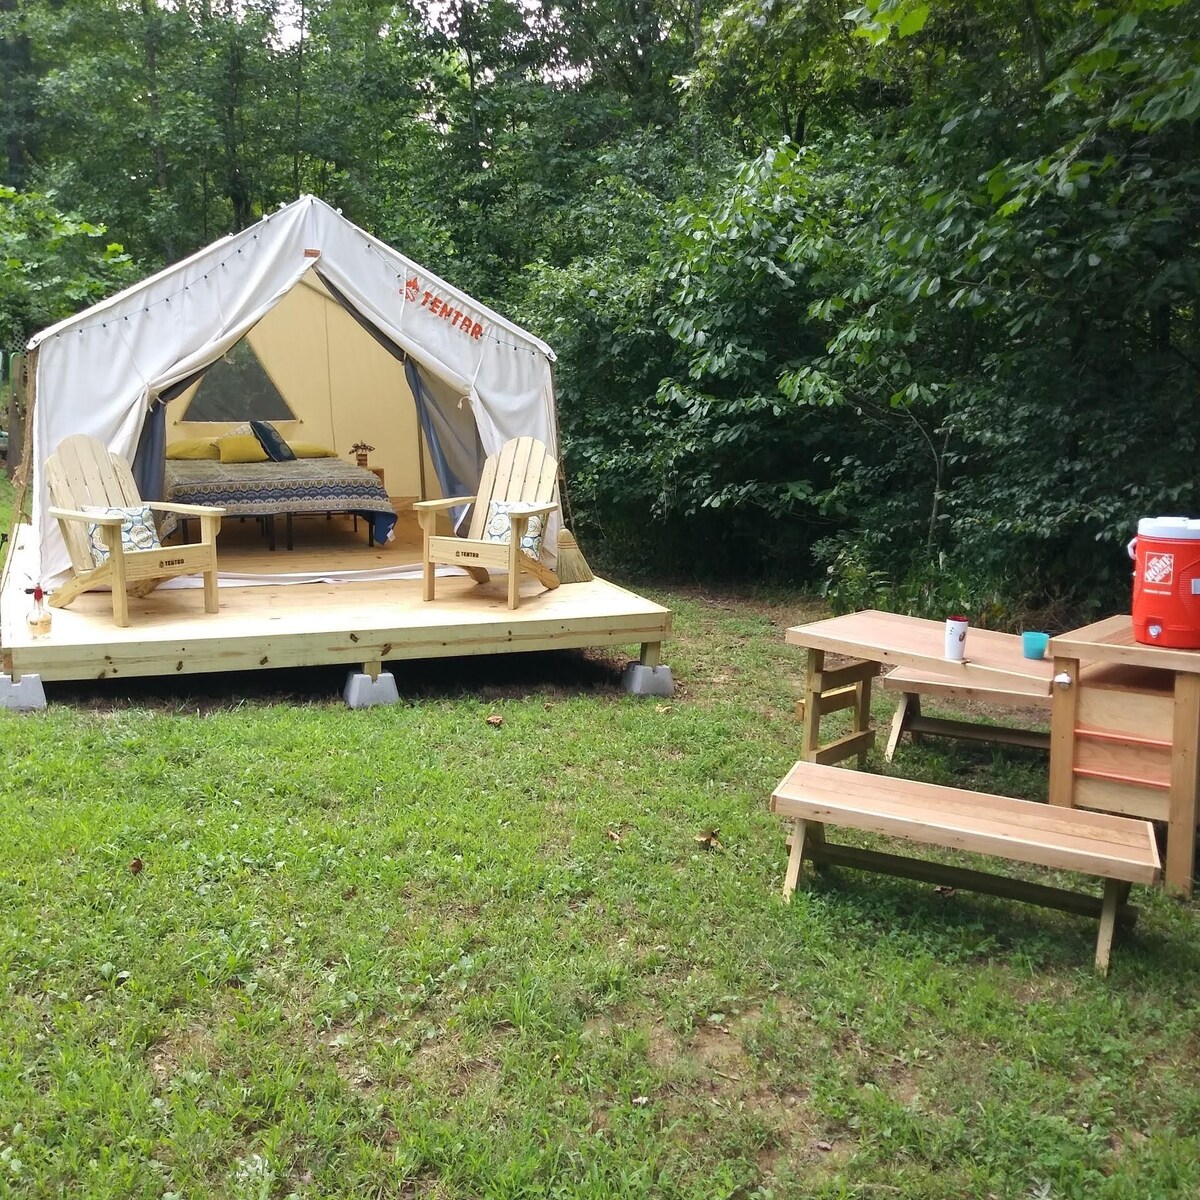 Bourbon Trail Ky Luxury Glamping Cabin&Tent